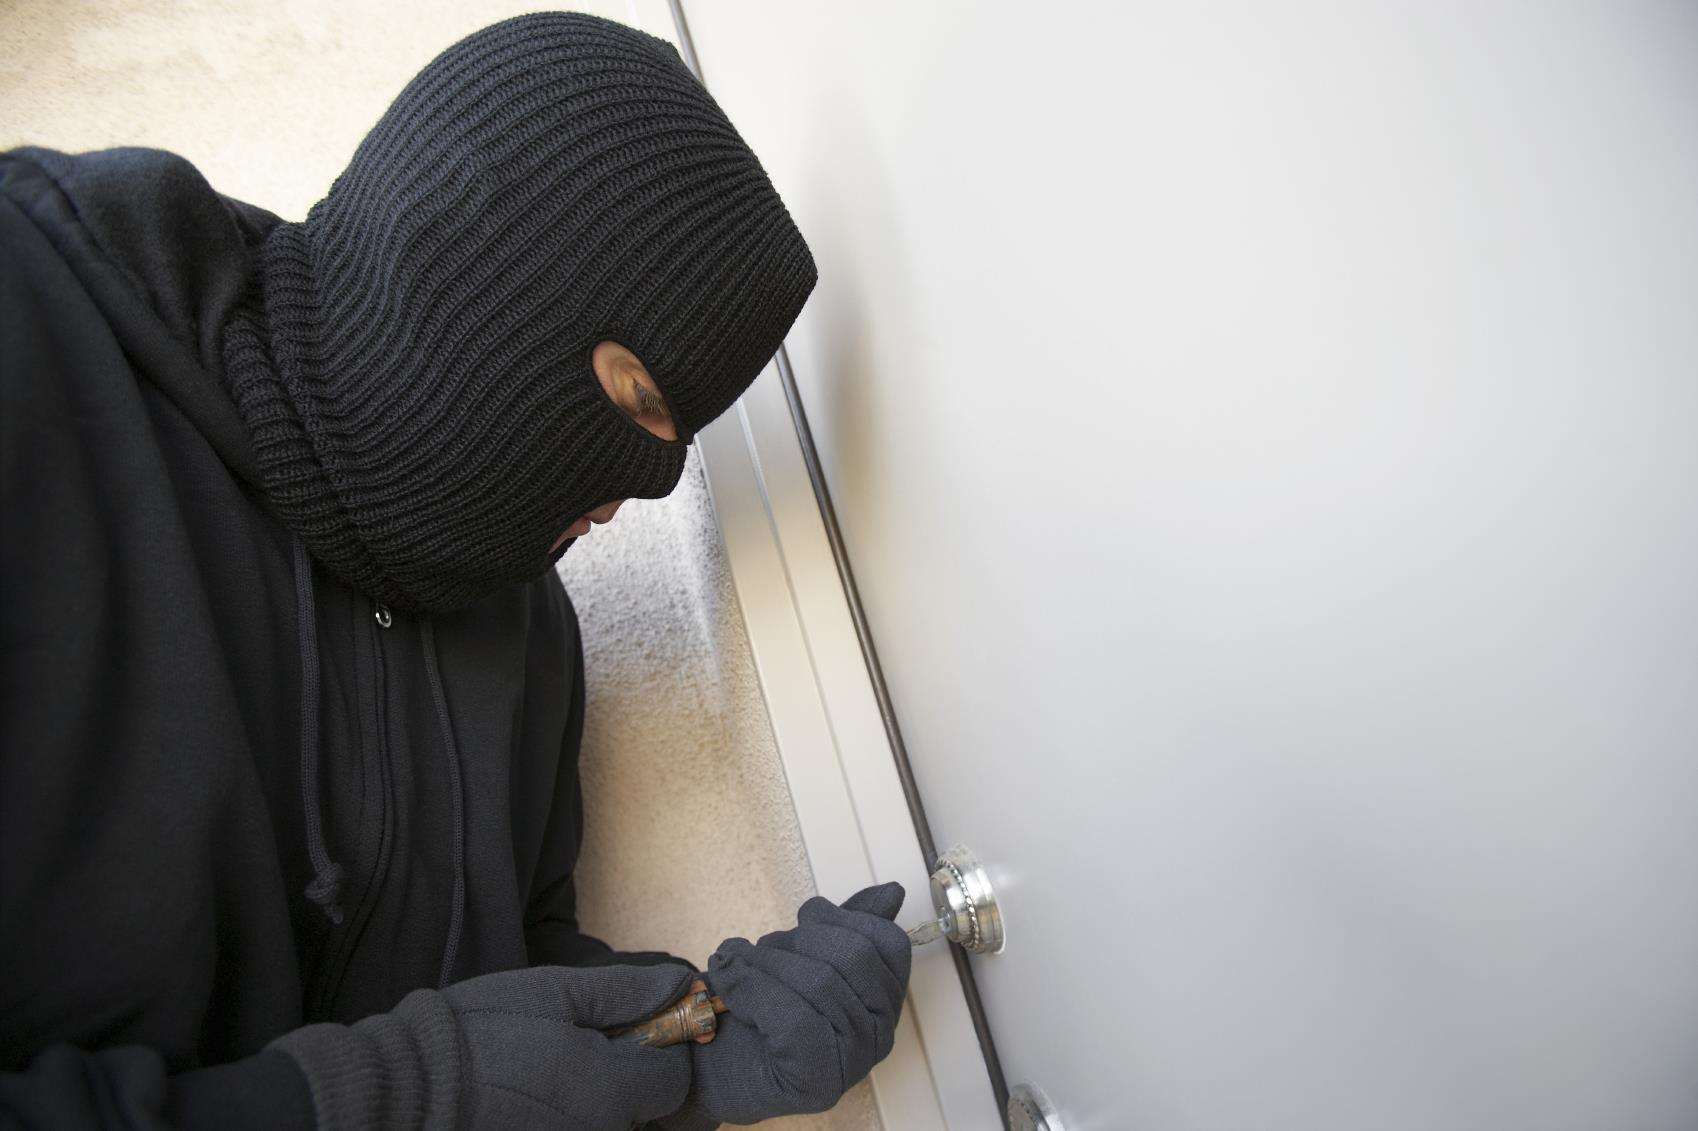 Six men with balaclavas entered the property. Picture: iStockLocation